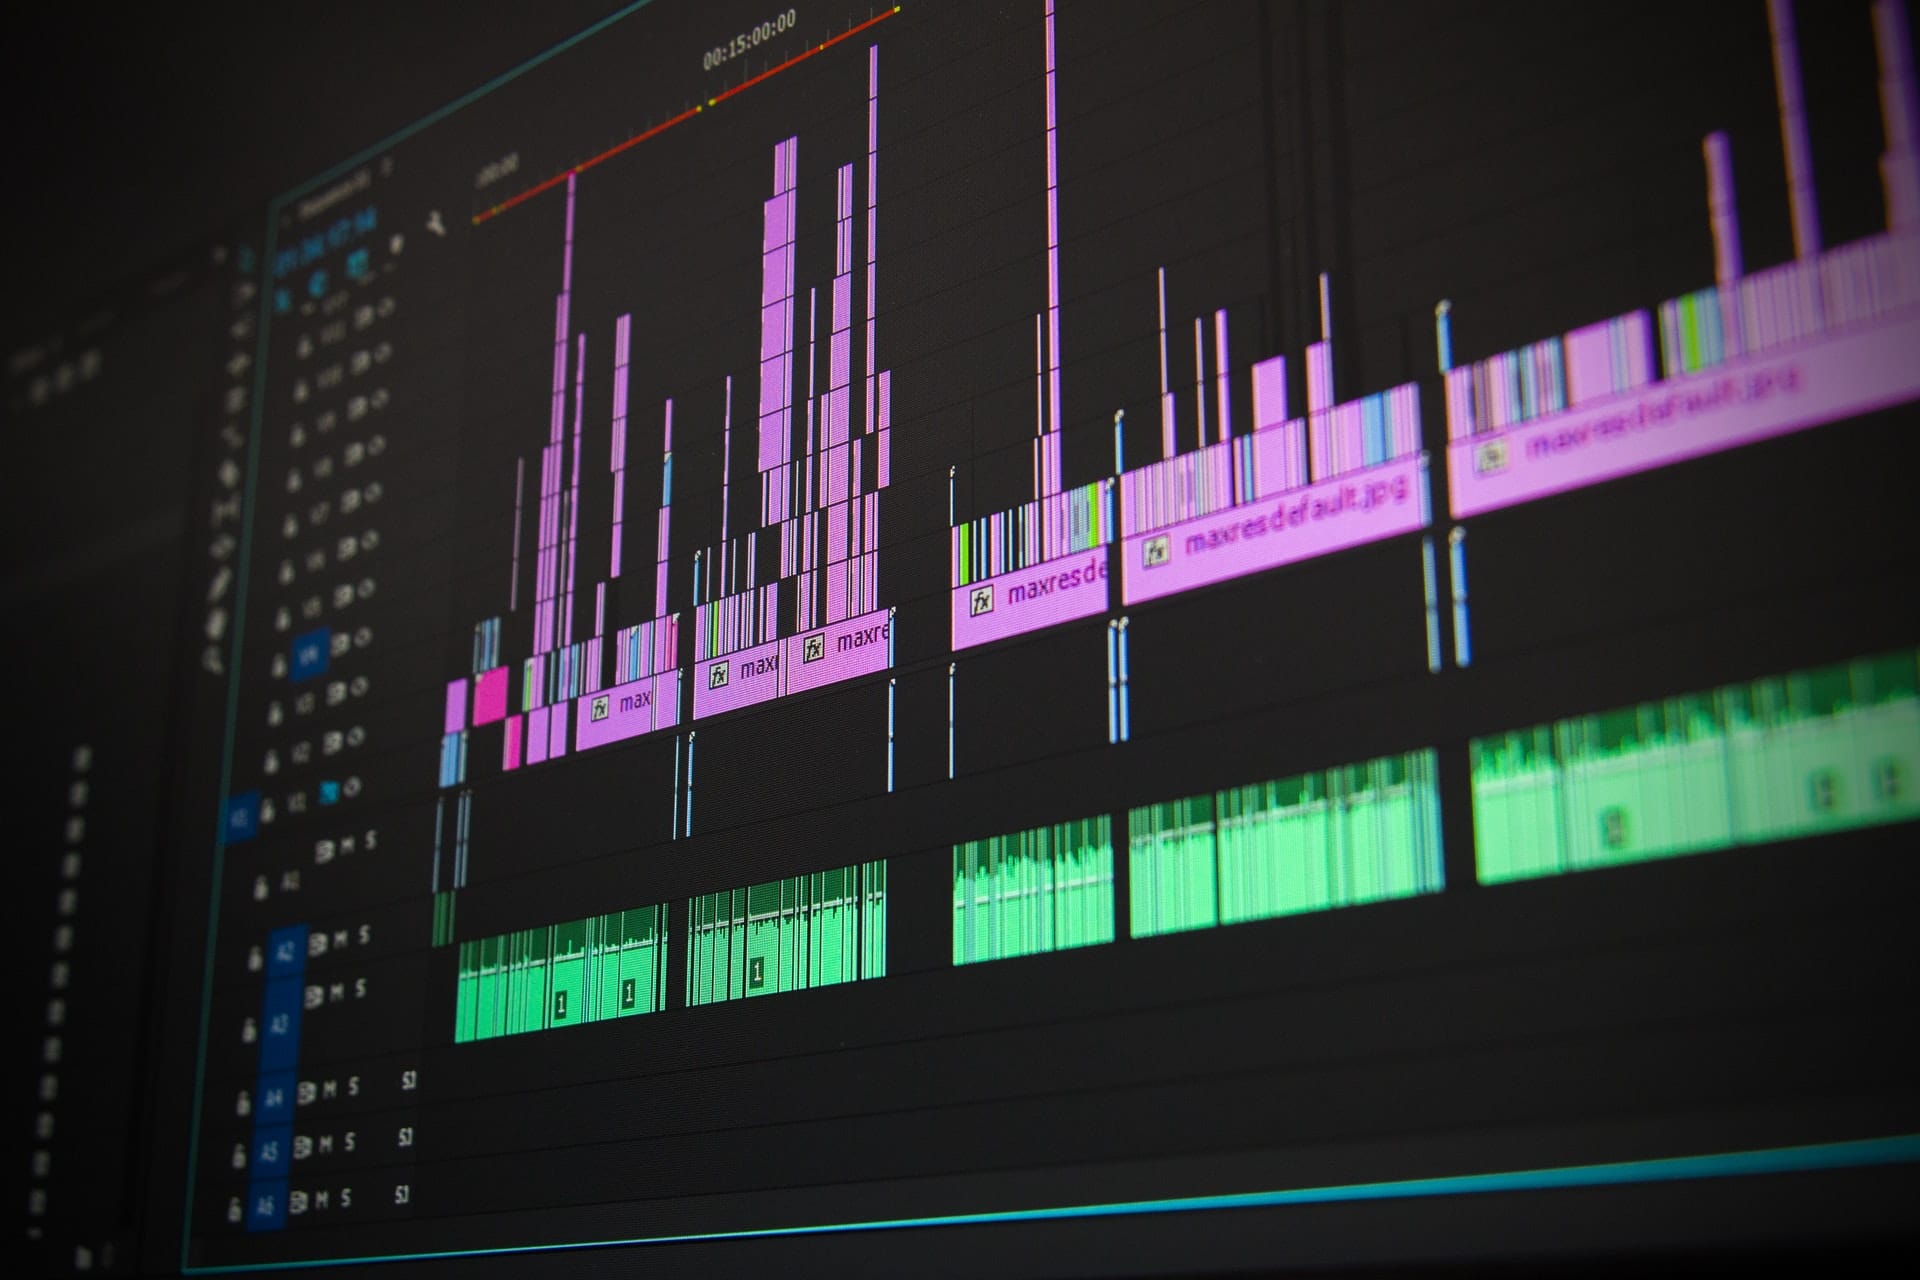 An image of a music editing system for Slice the Pie